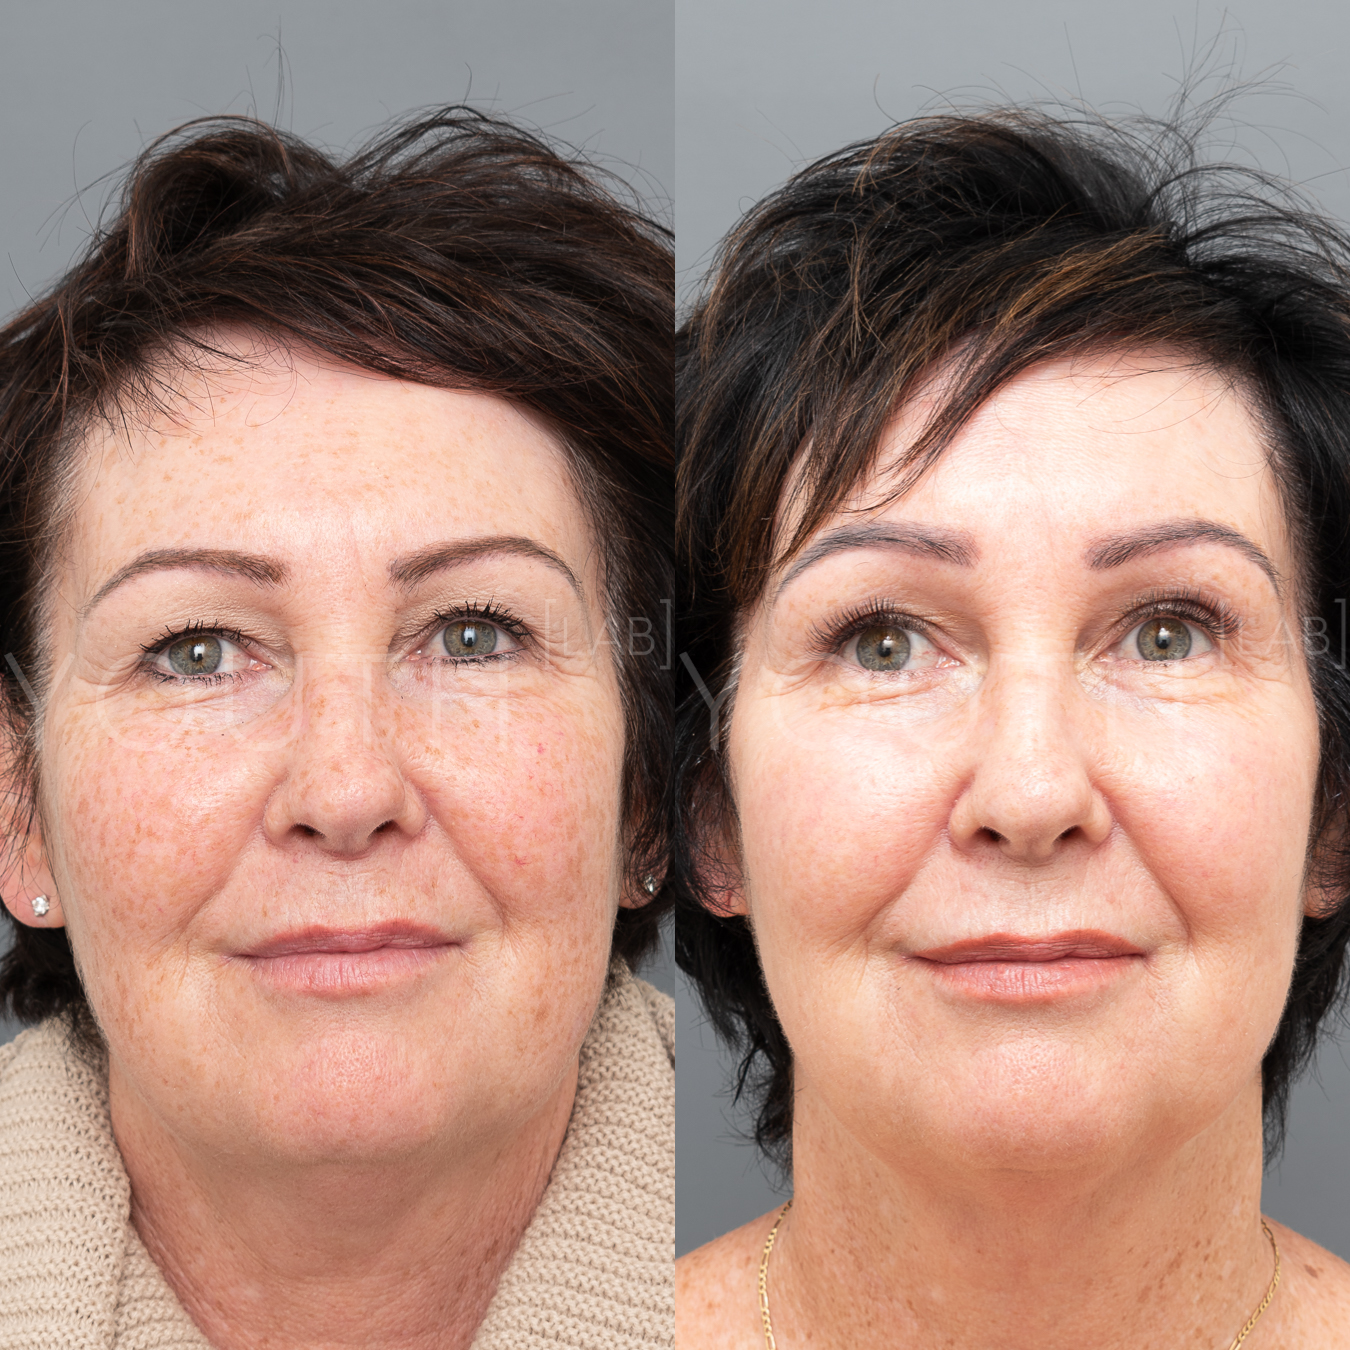 Before and after images following one session of BBL treatment